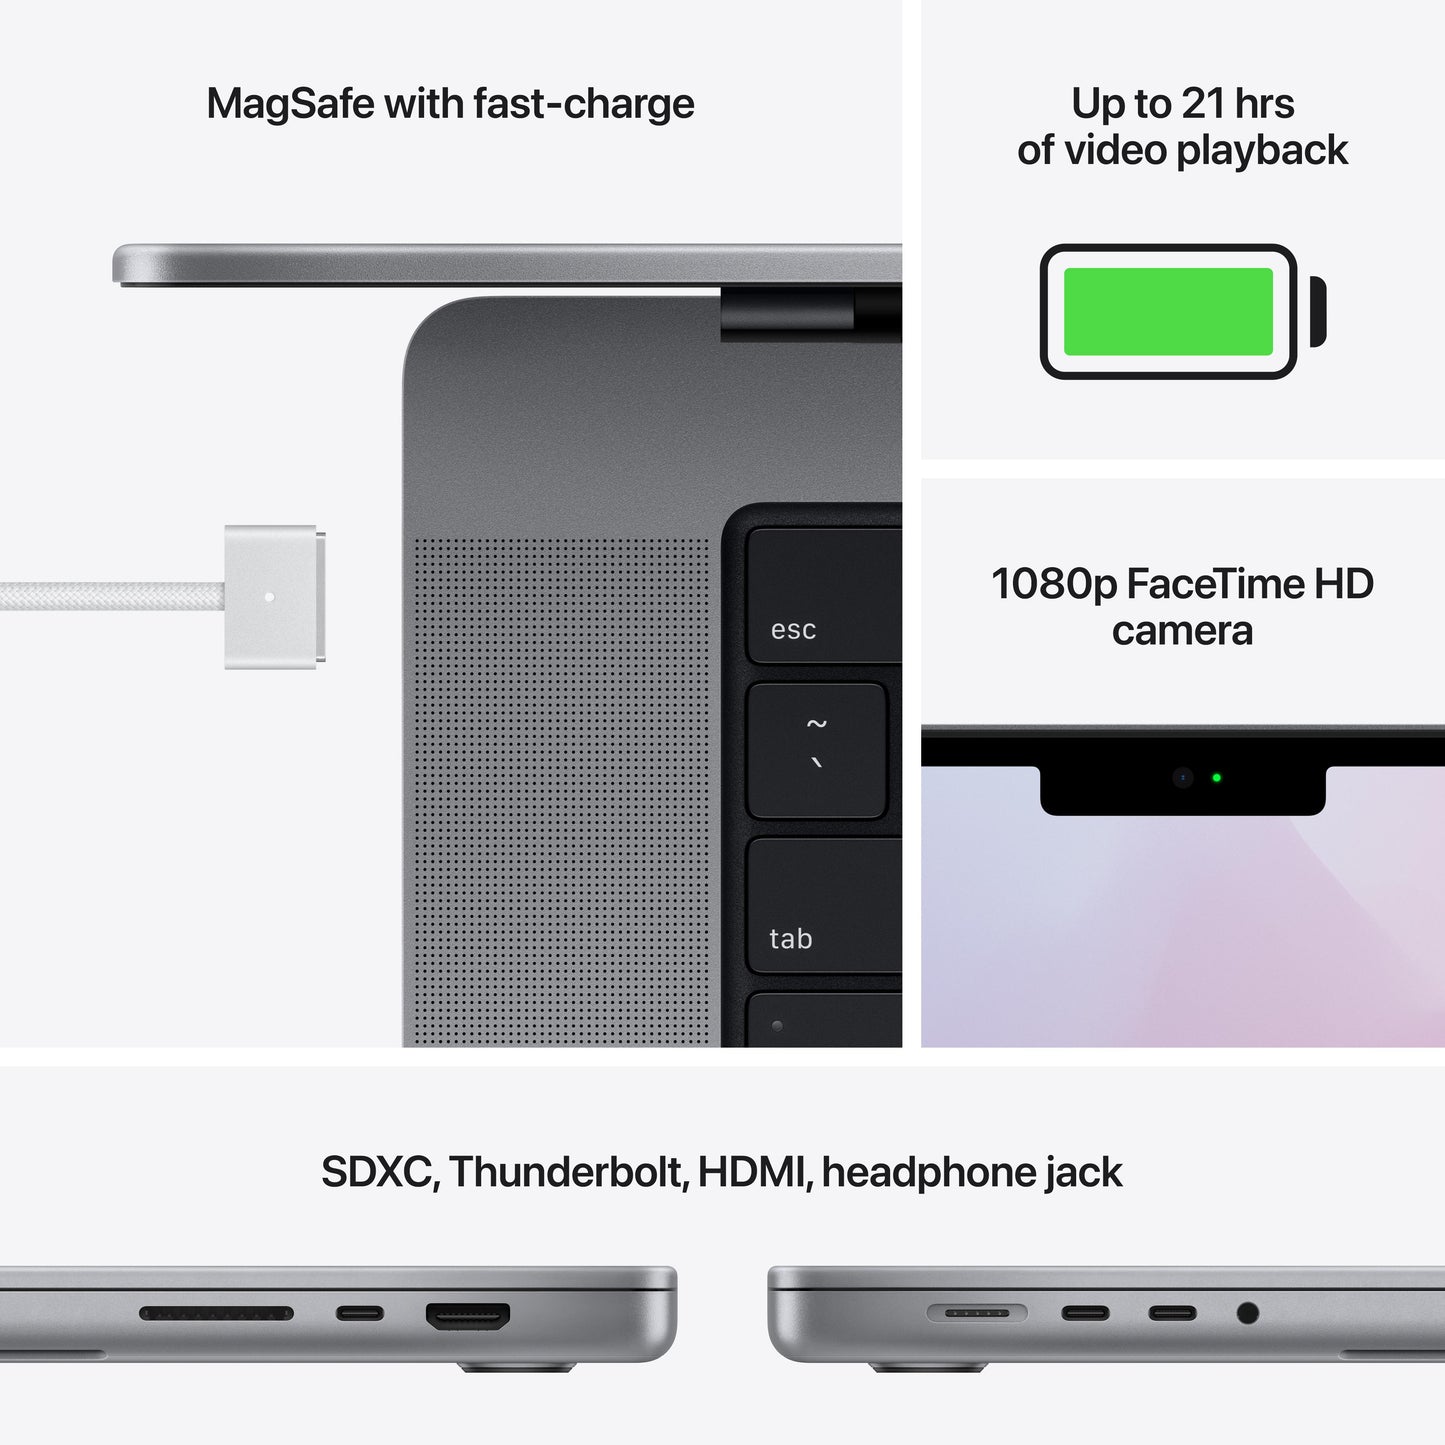 16-inch MacBook Pro: Apple M1 Pro chip with 10_core CPU and 16_core GPU 1TB SSD - Space Grey